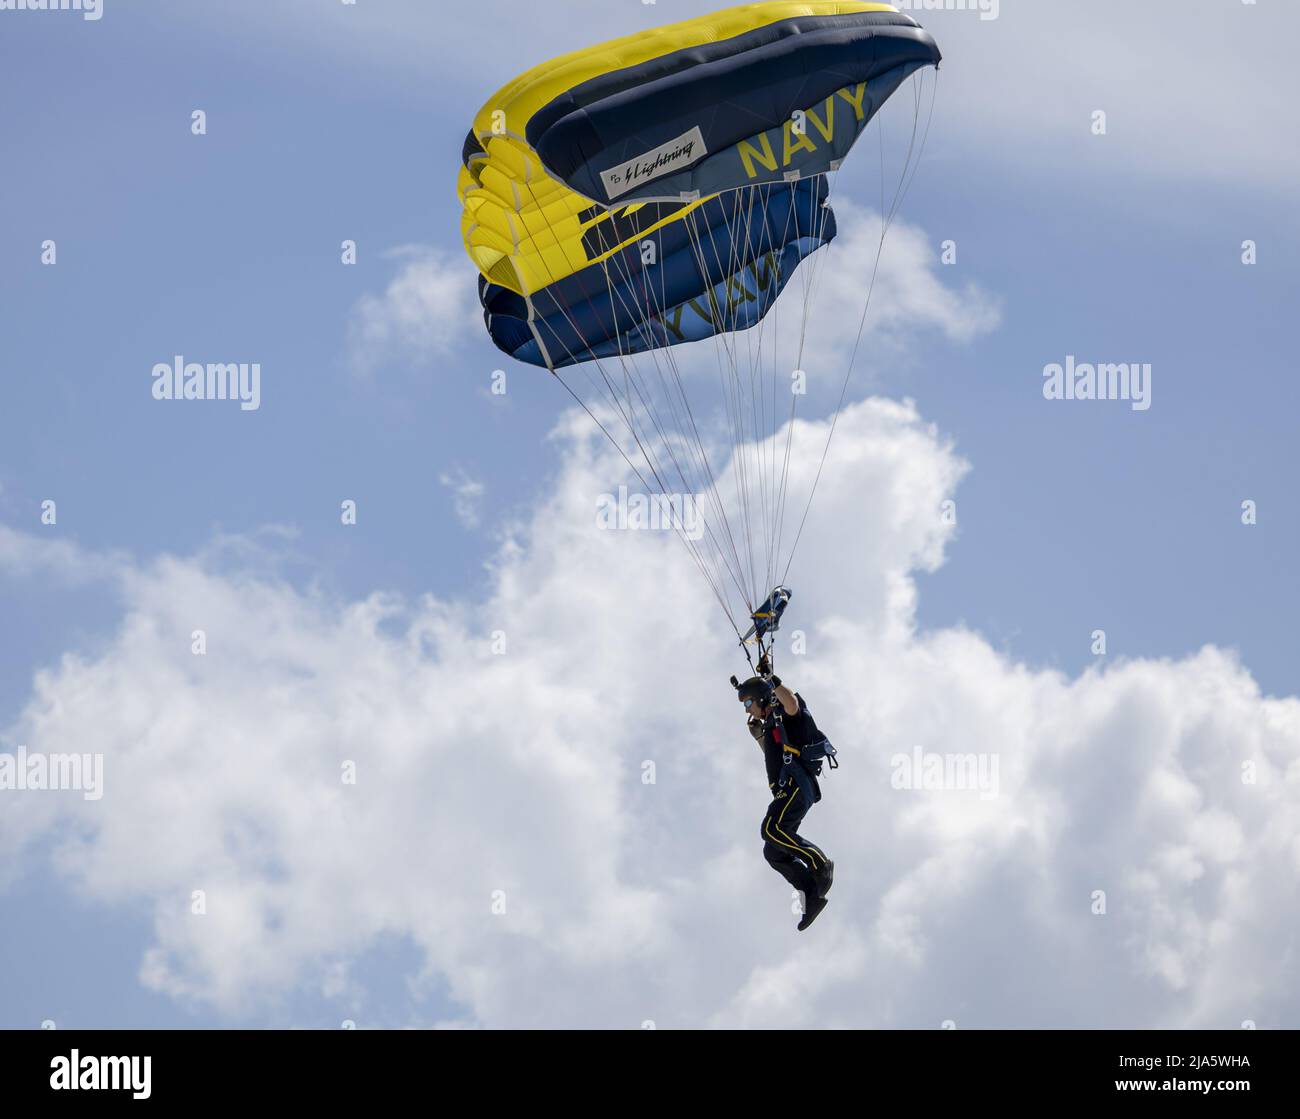 Miami, United States. 27th May, 2022. The U.S. Army Golden Knights parachute jump team perform at the Hyundai Air & Sea Show media day at the US Coast Guard Air Station in Miami, Florida on Friday, May 27, 2022. The Miami Memorial Day air and sea show will feature the US Army HH-60 Black Hawk, USAF A-10 Thunderbolt II, USAF B-52 Bomber, USAF C-130 Hercules, USAF C-17 Global Master III, USAF C-5 Galaxy, USAF CH-53 Sea Stallion, F-15 Eagle, USAF F-16 Fighting Falcon, USAF KC-135 Stratotanker, USN F-18 Rhino. Photo By Gary I Rothstein/UPI Credit: UPI/Alamy Live News Stock Photo